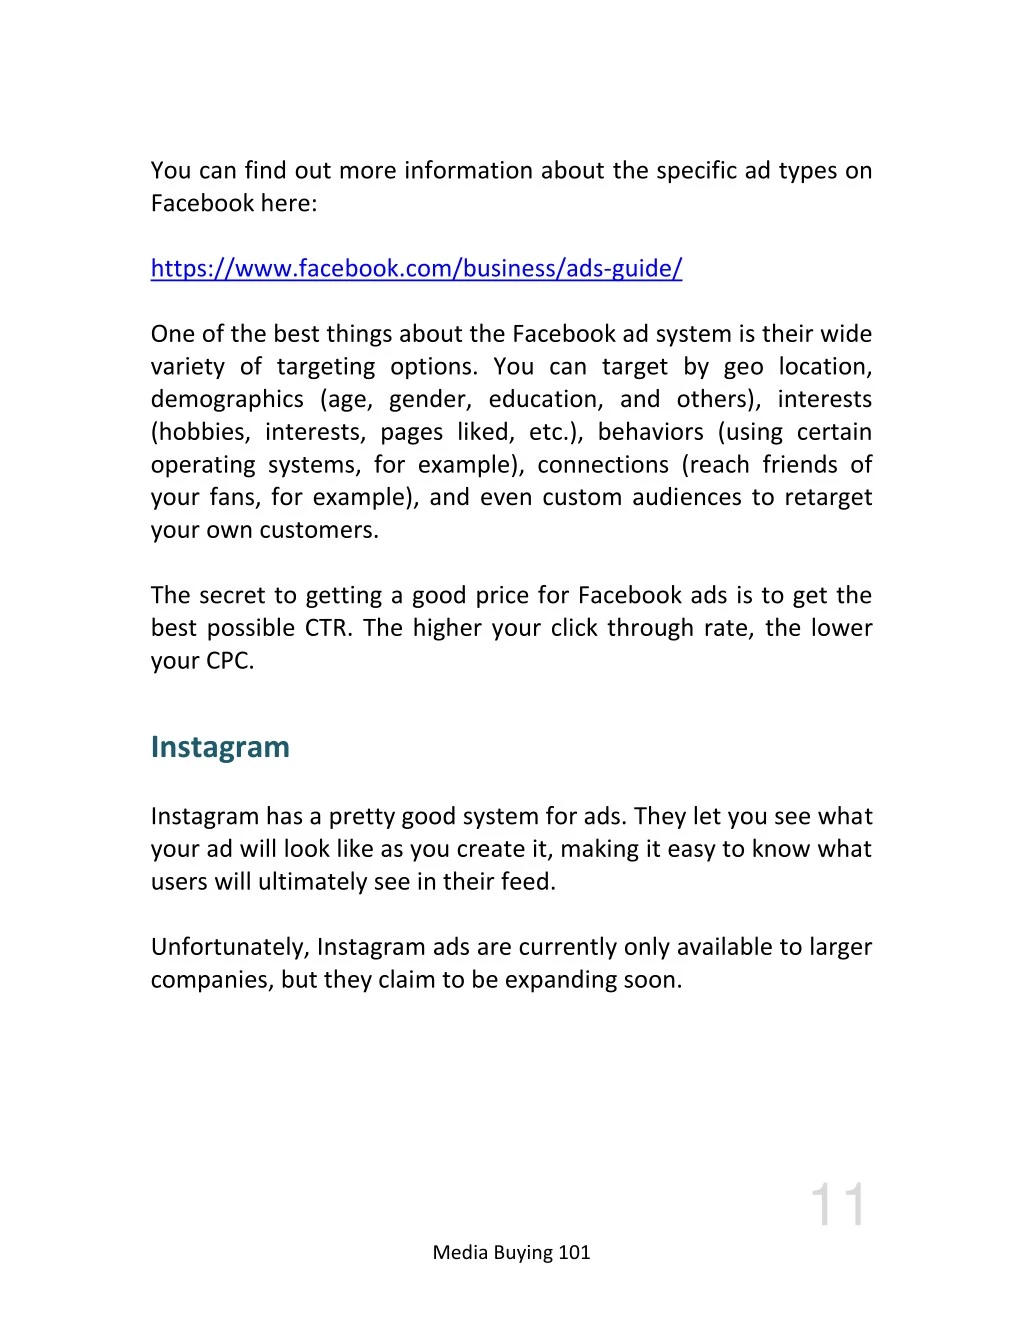 you can find out more information about the specific ad types on - 11 ways to get more real instagram followers wordstreamwordstream